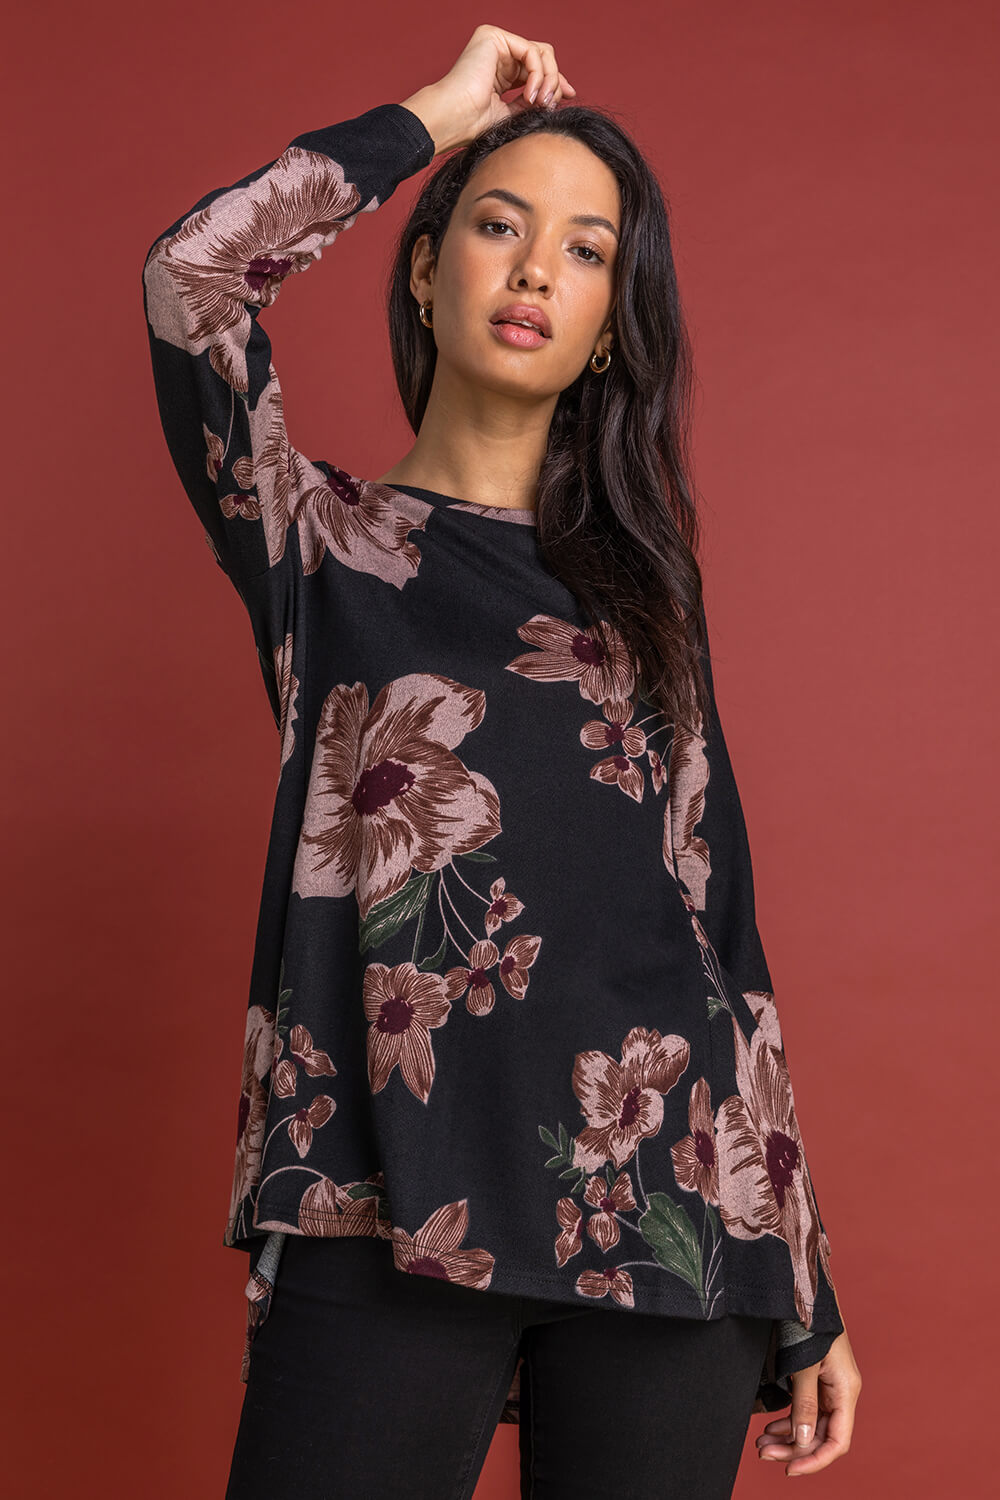 KICILVS Womens Tunic Tops to Wear with Leggings Floral Printed